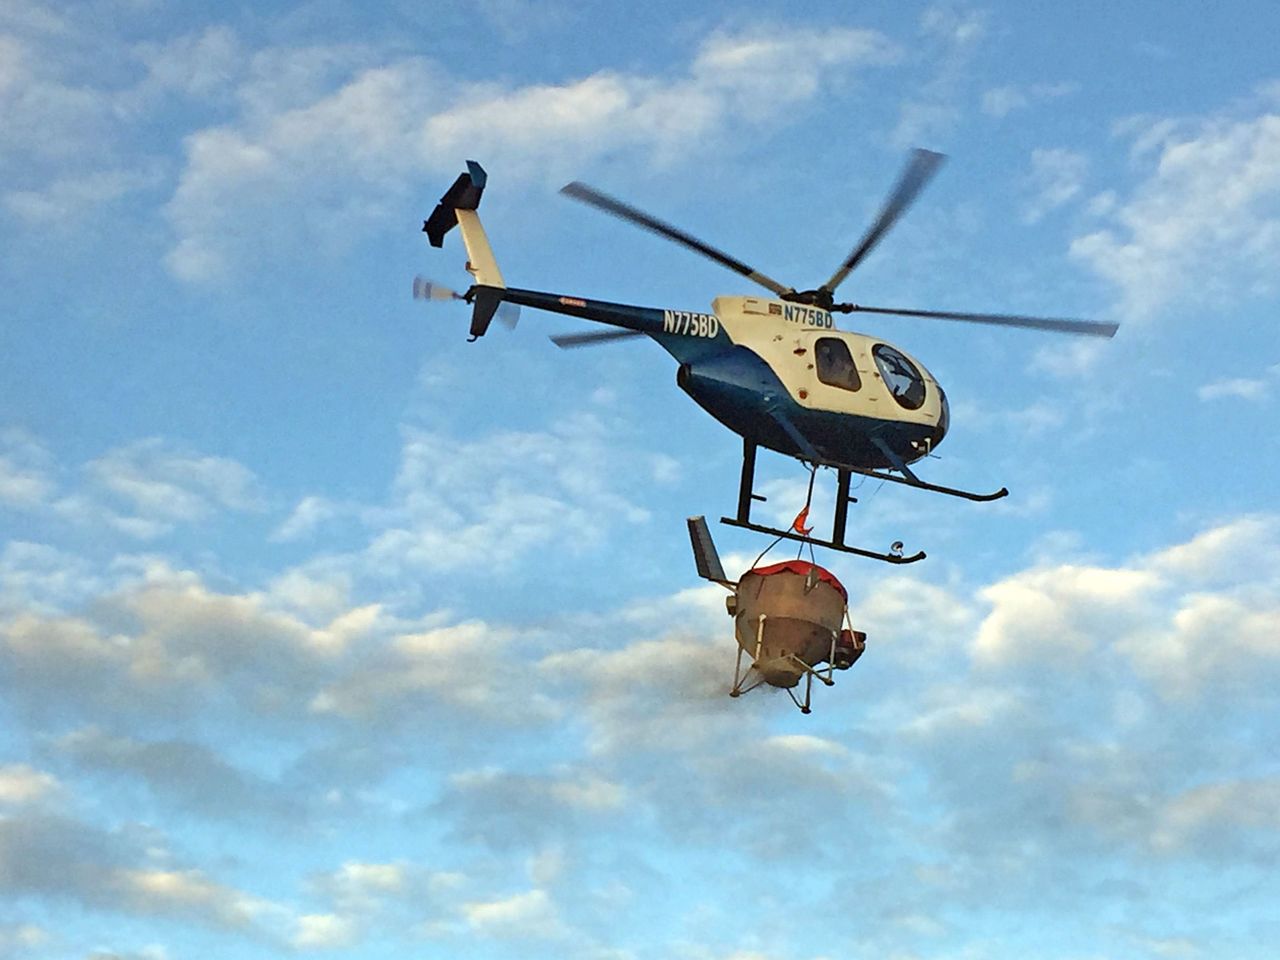 A helicopter carries seeds to be dispersed over a burned area of the Soda Fire in southwest Idaho in 2015 to help stabilize soils and combat invasive weeds such as cheatgrass.